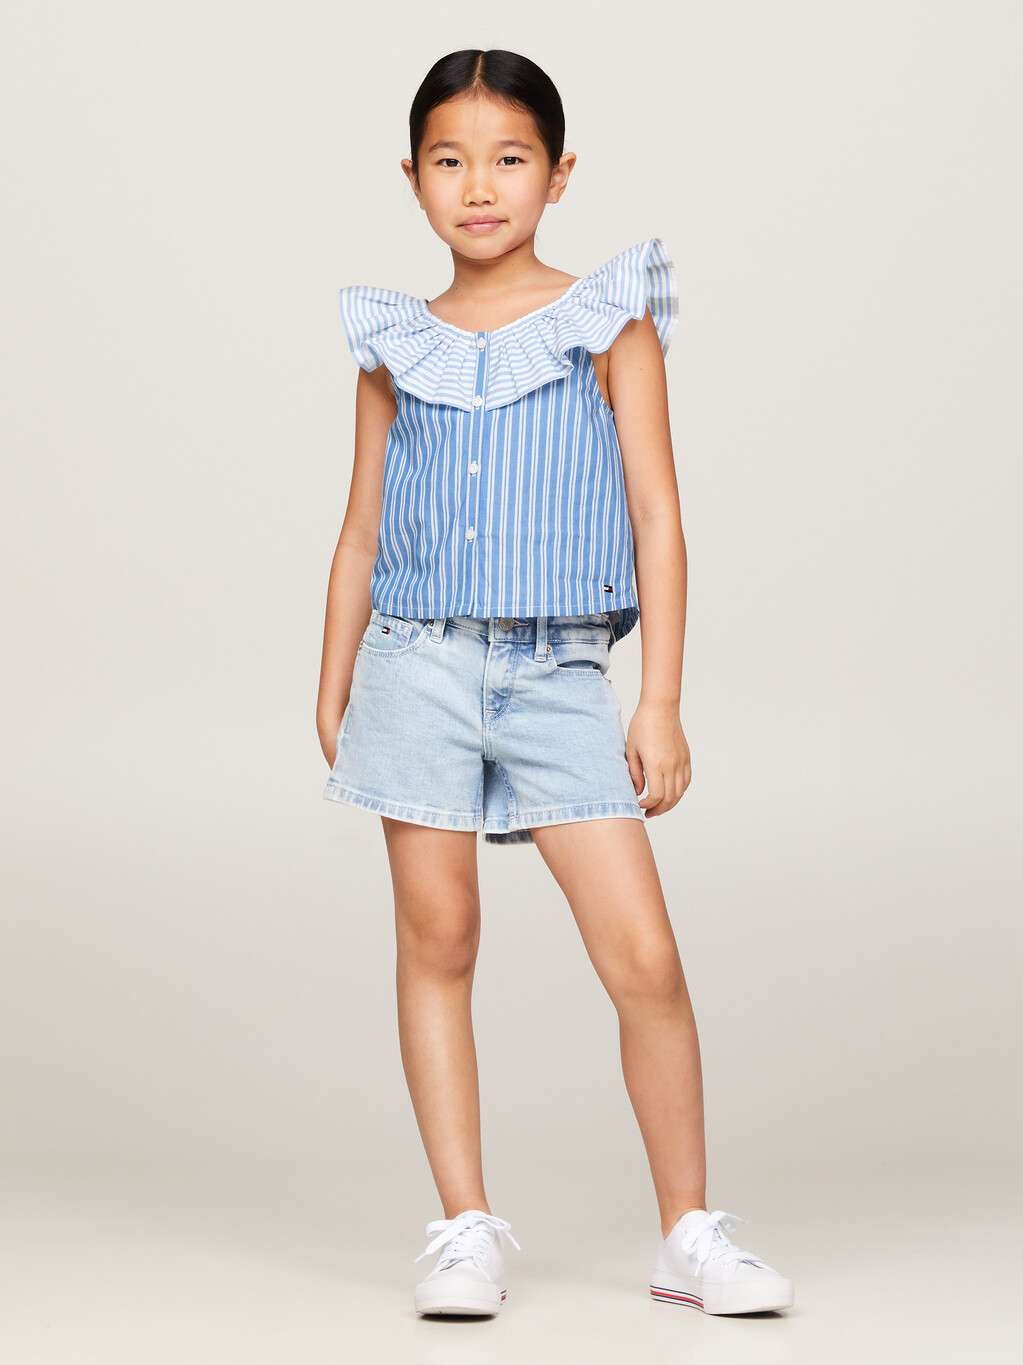 Mixed Stripe Frill Neckline Cropped Top, Blue Spell Stripe / White, hi-res